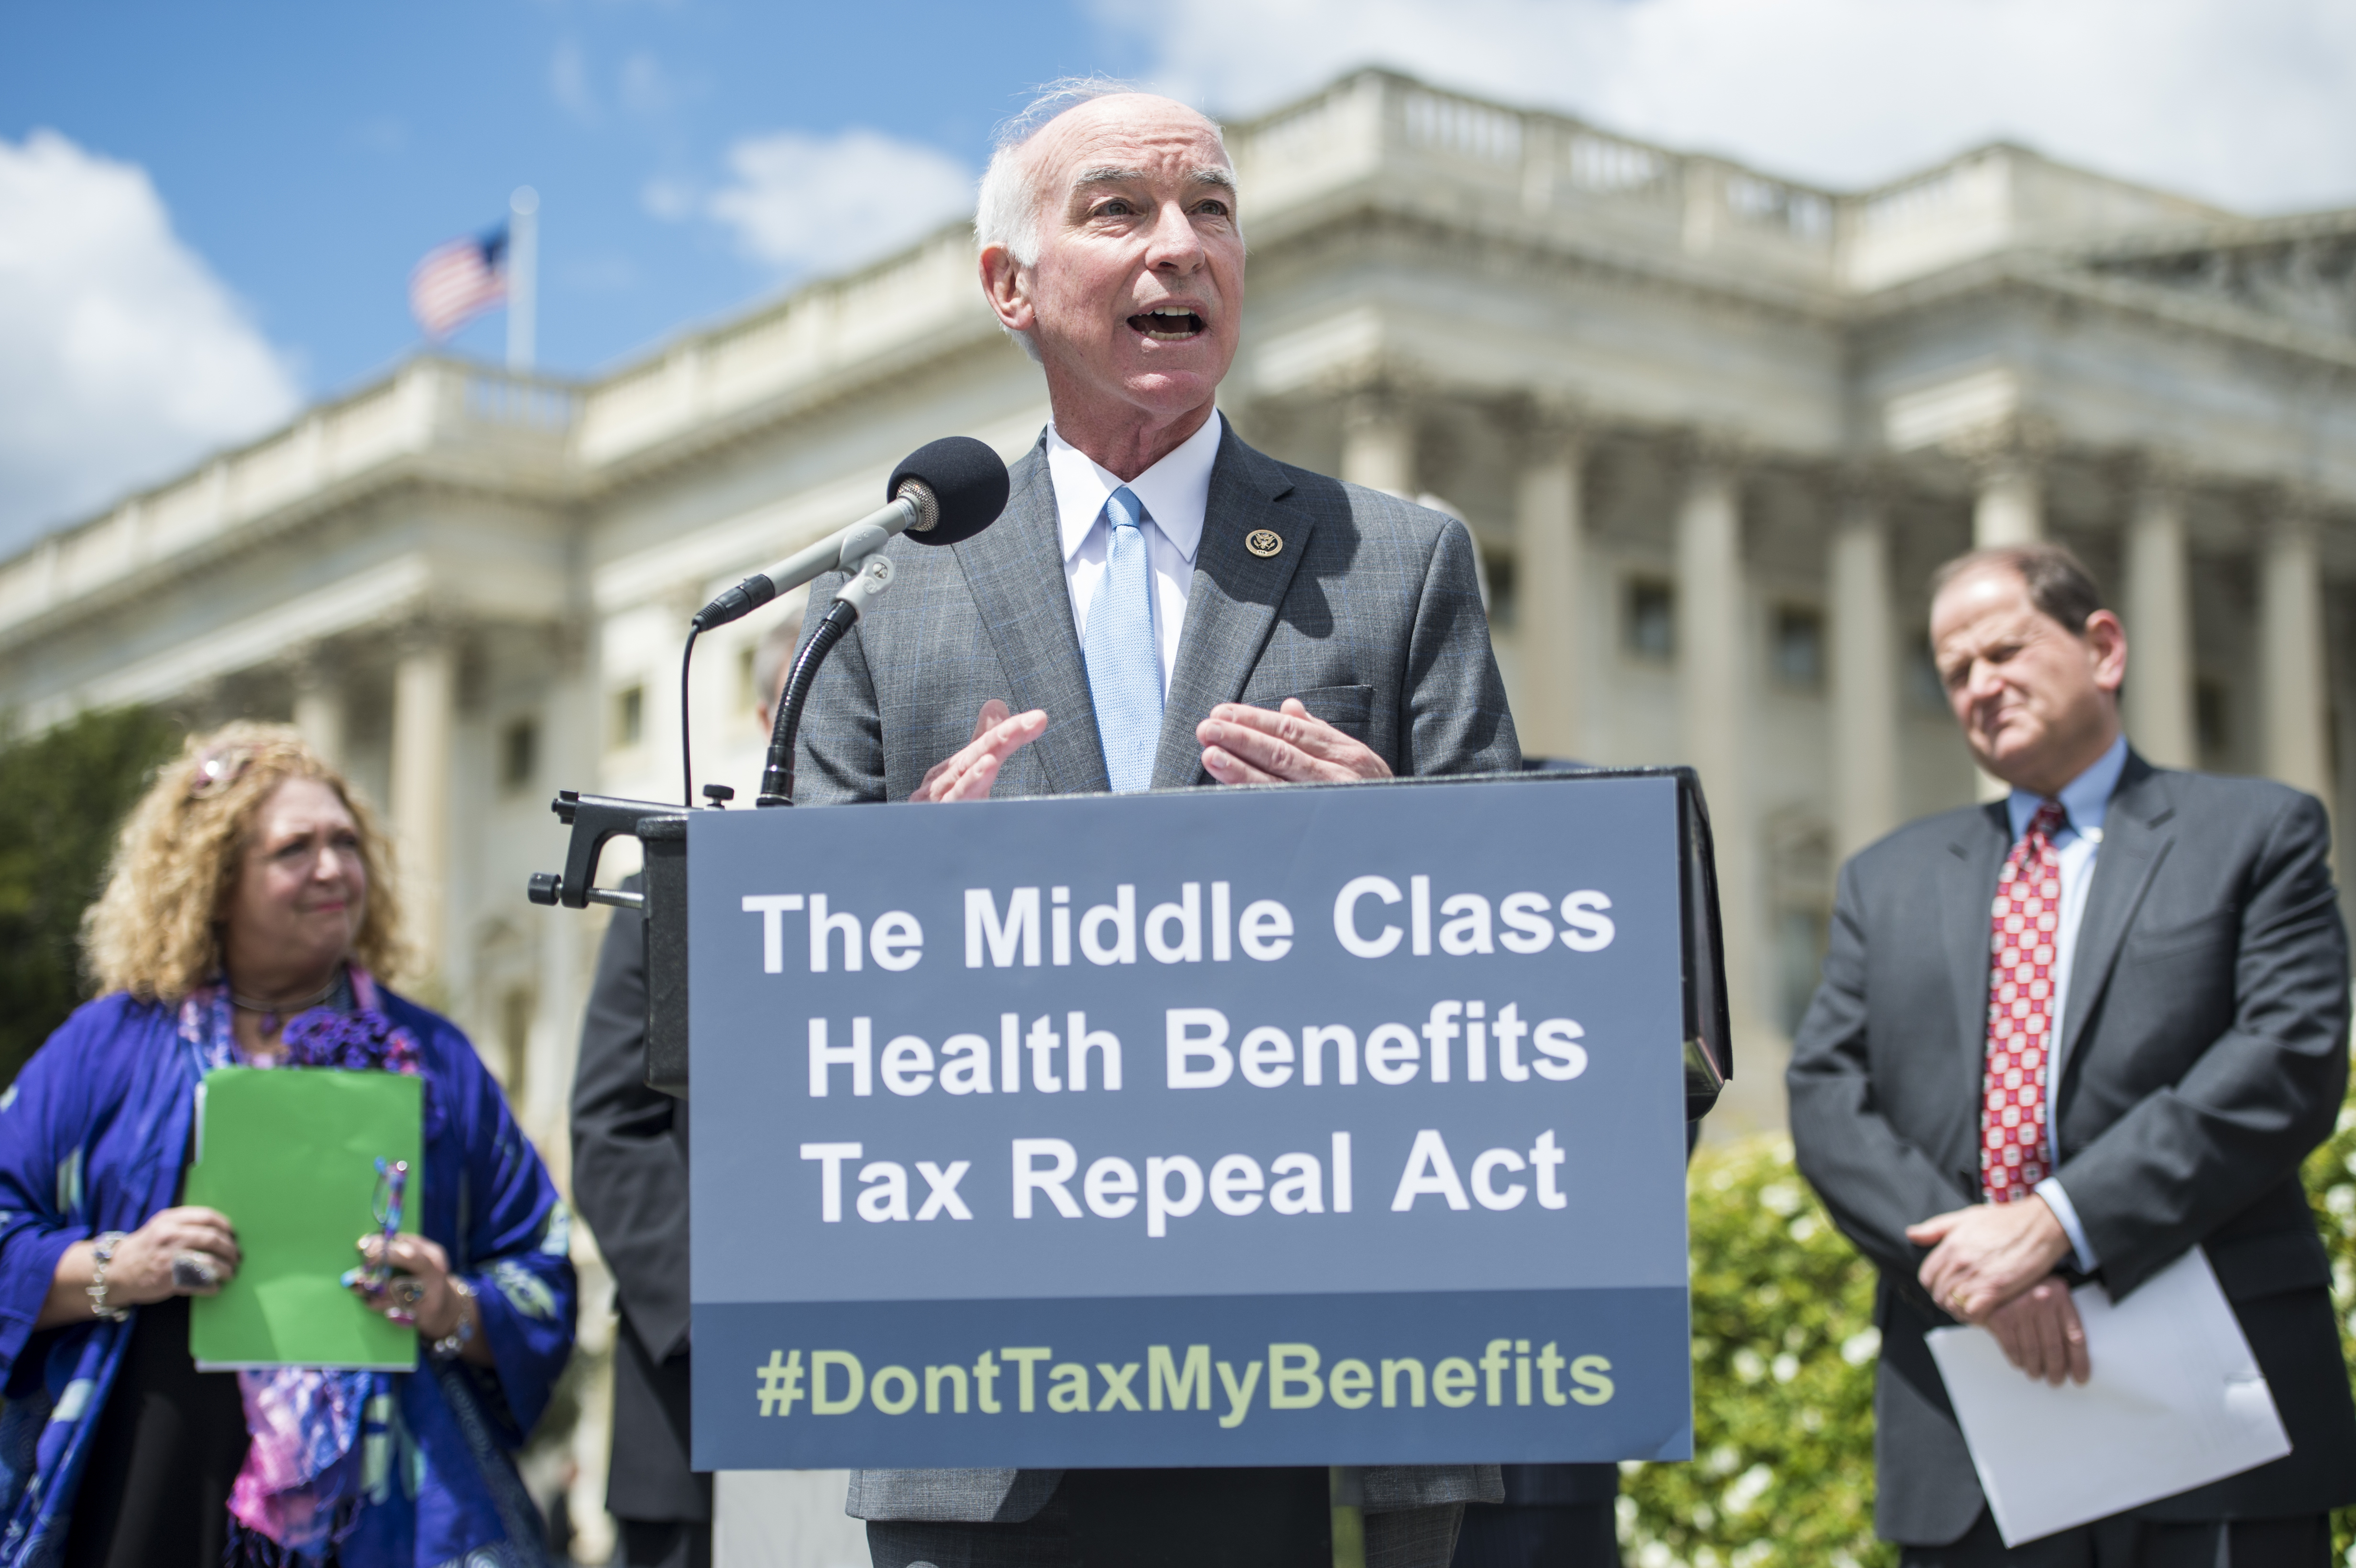 Rep. Joe Courtney, D-Conn., proposed a bill in April to repeal the impending excise tax on employee health benefits that Obamacare deems excessive. (Photo by Bill Clark/CQ-Roll Call, Inc.)